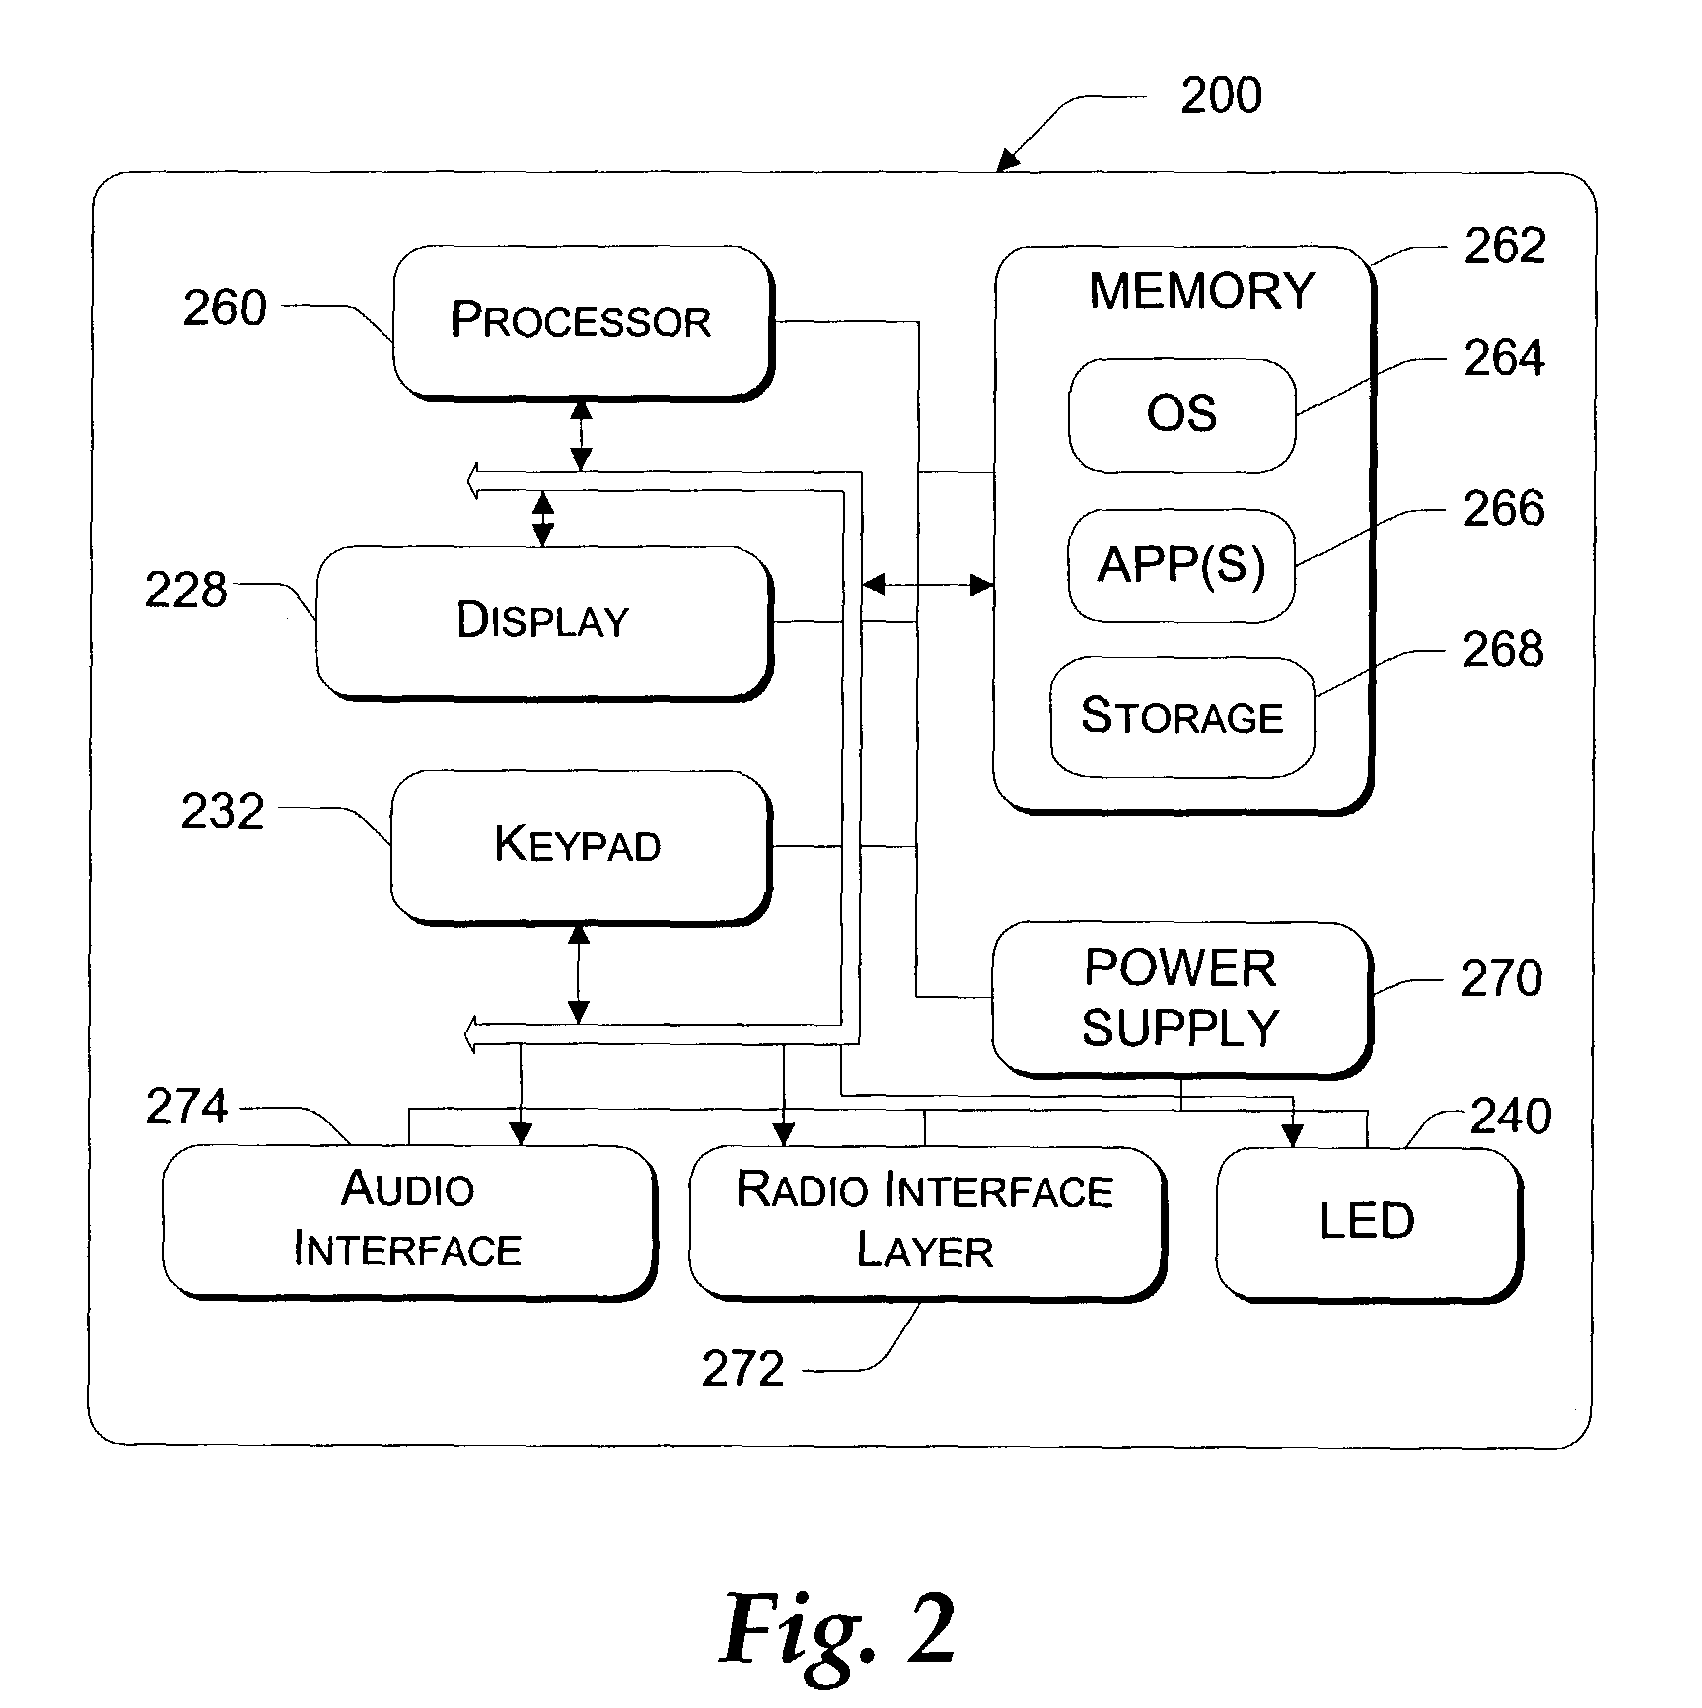 System and method for scaling data according to an optimal width for display on a mobile device